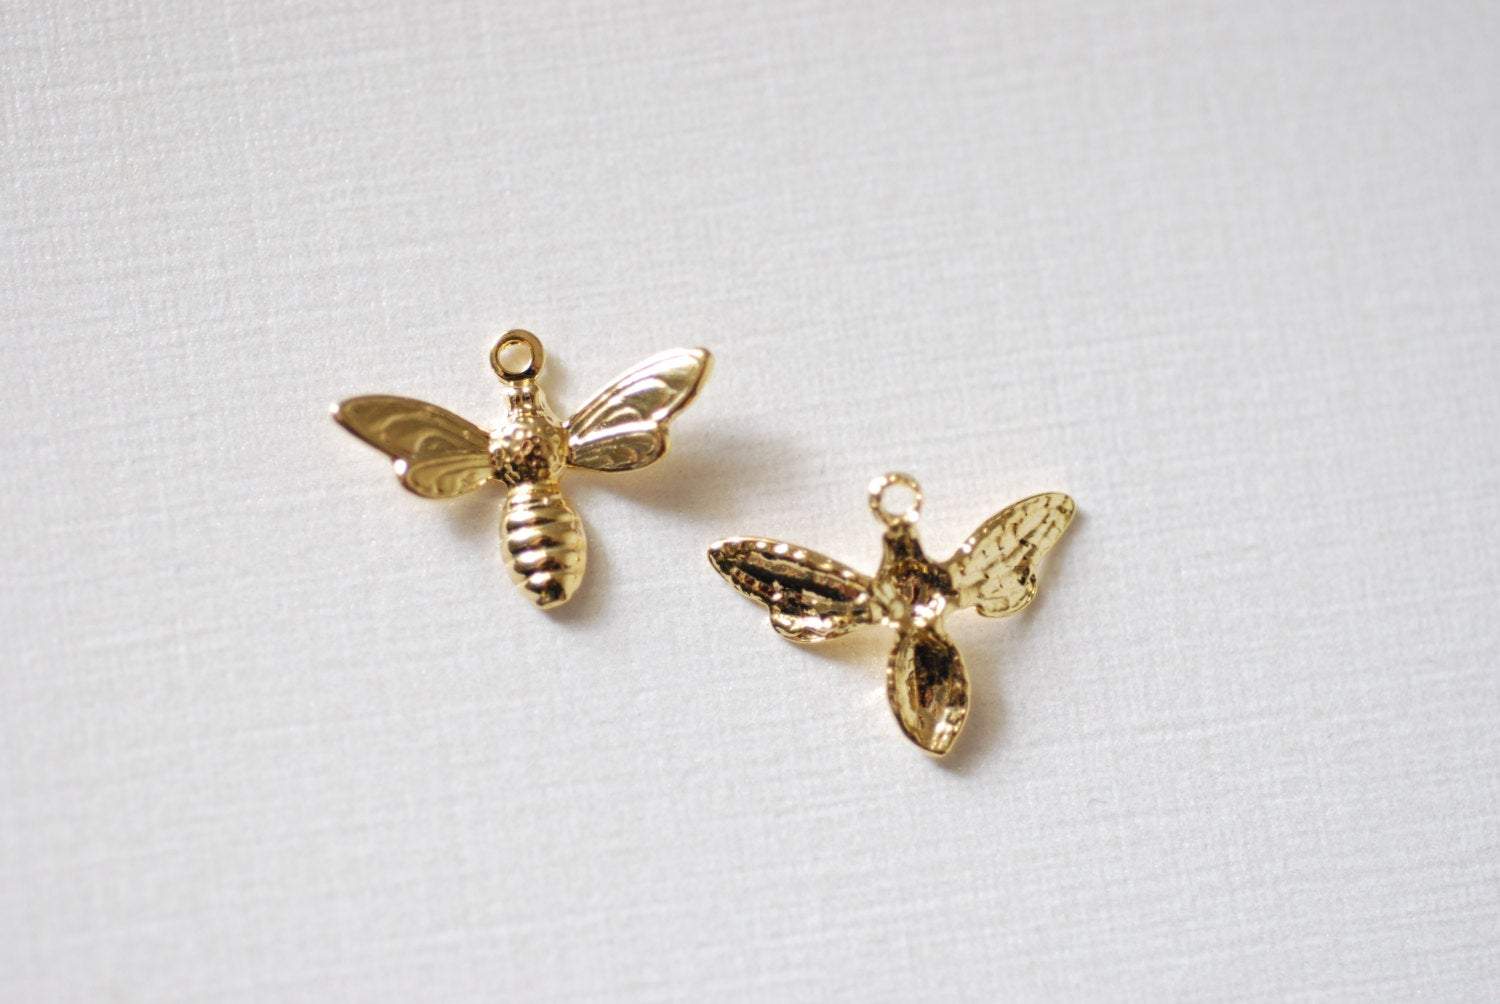 Bee Charm, Gold-Plated Vermeil, 16mm x 12mm, Honeybee Bumblebee Insect Charm, Jewelry Making Charms